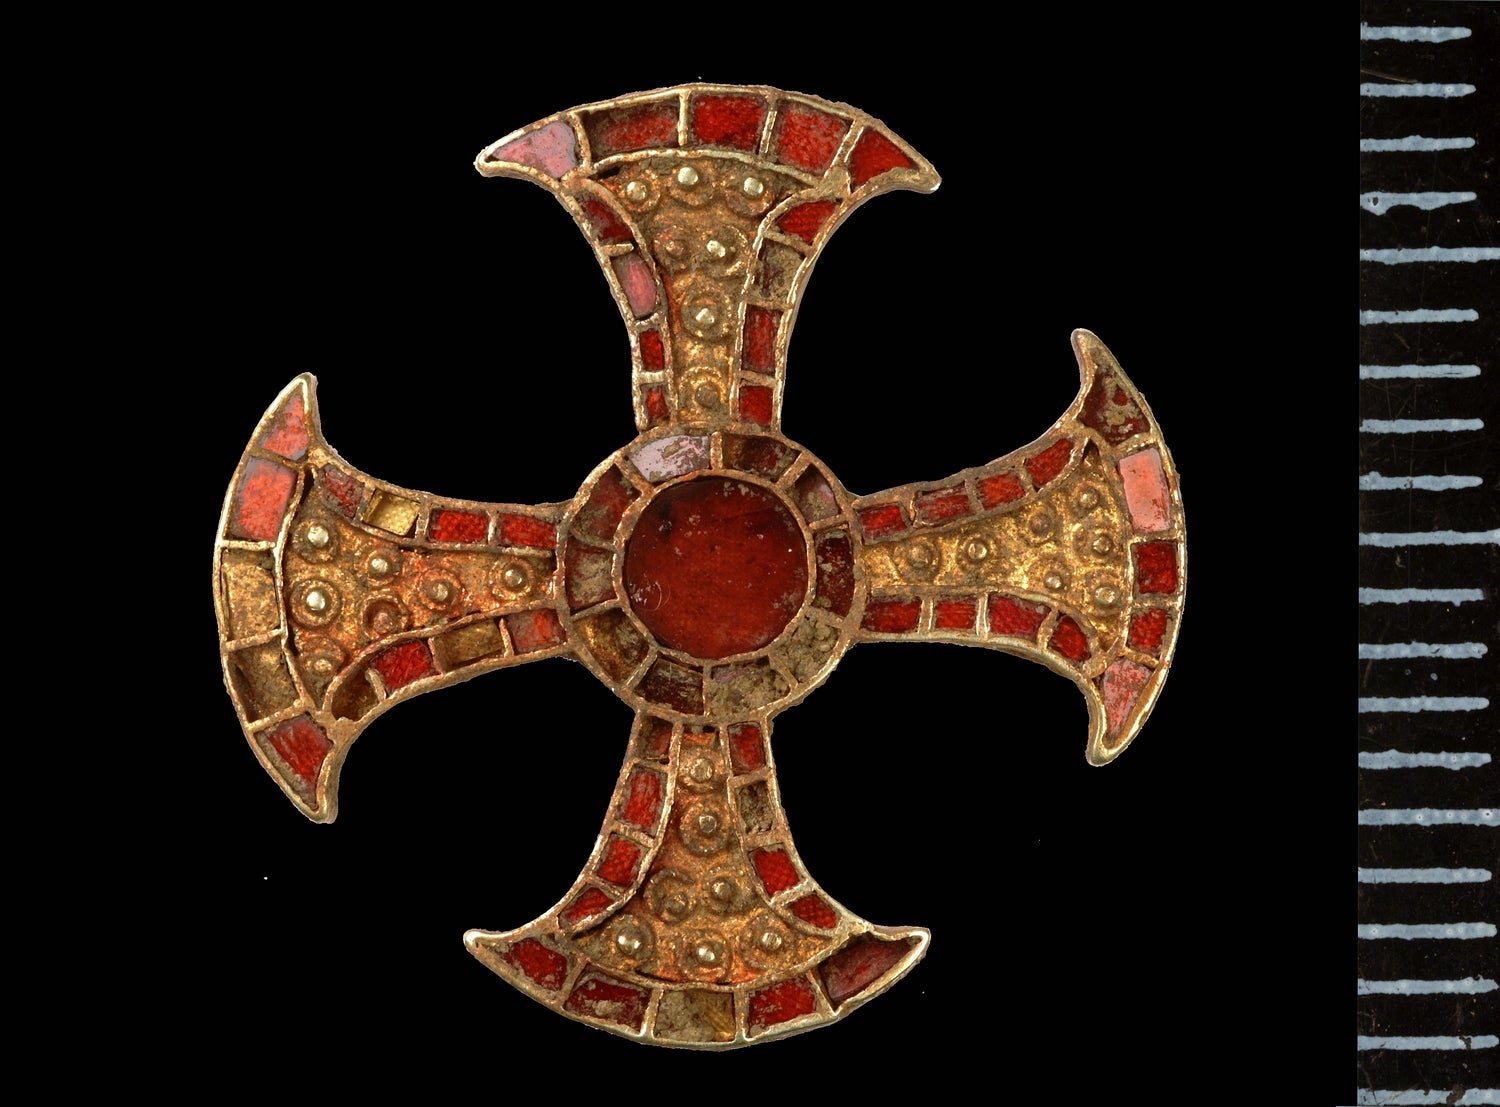 The Trumpington Cross, a cross made with gold and garnet stones.